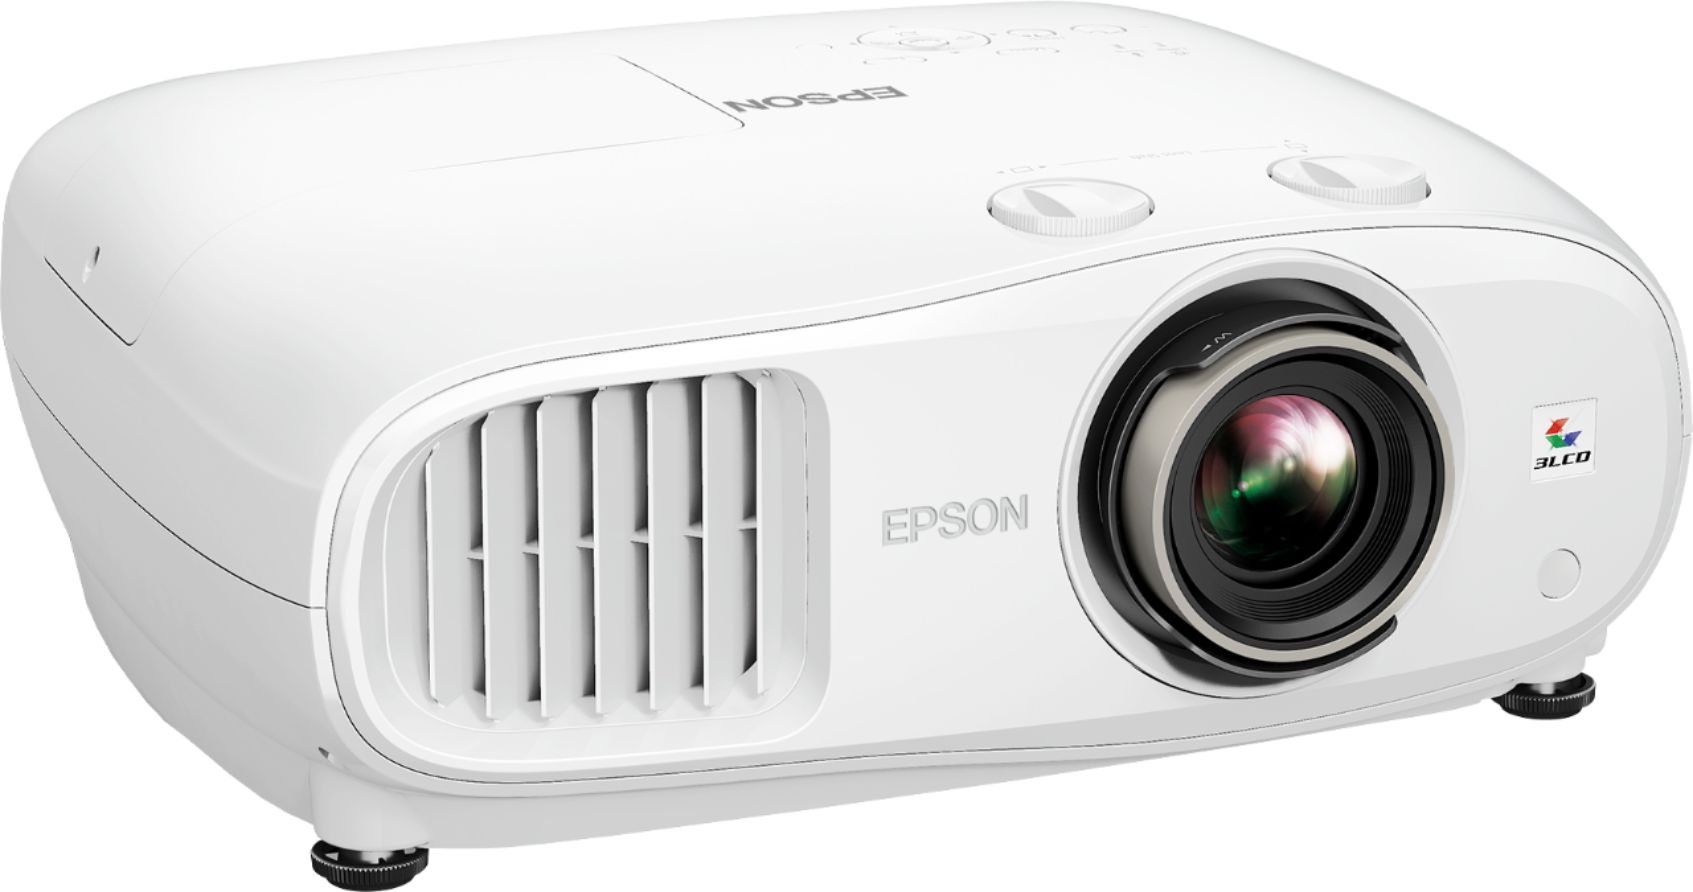 Angle View: Core Innovations - 150” LCD Home Theater Projector - White